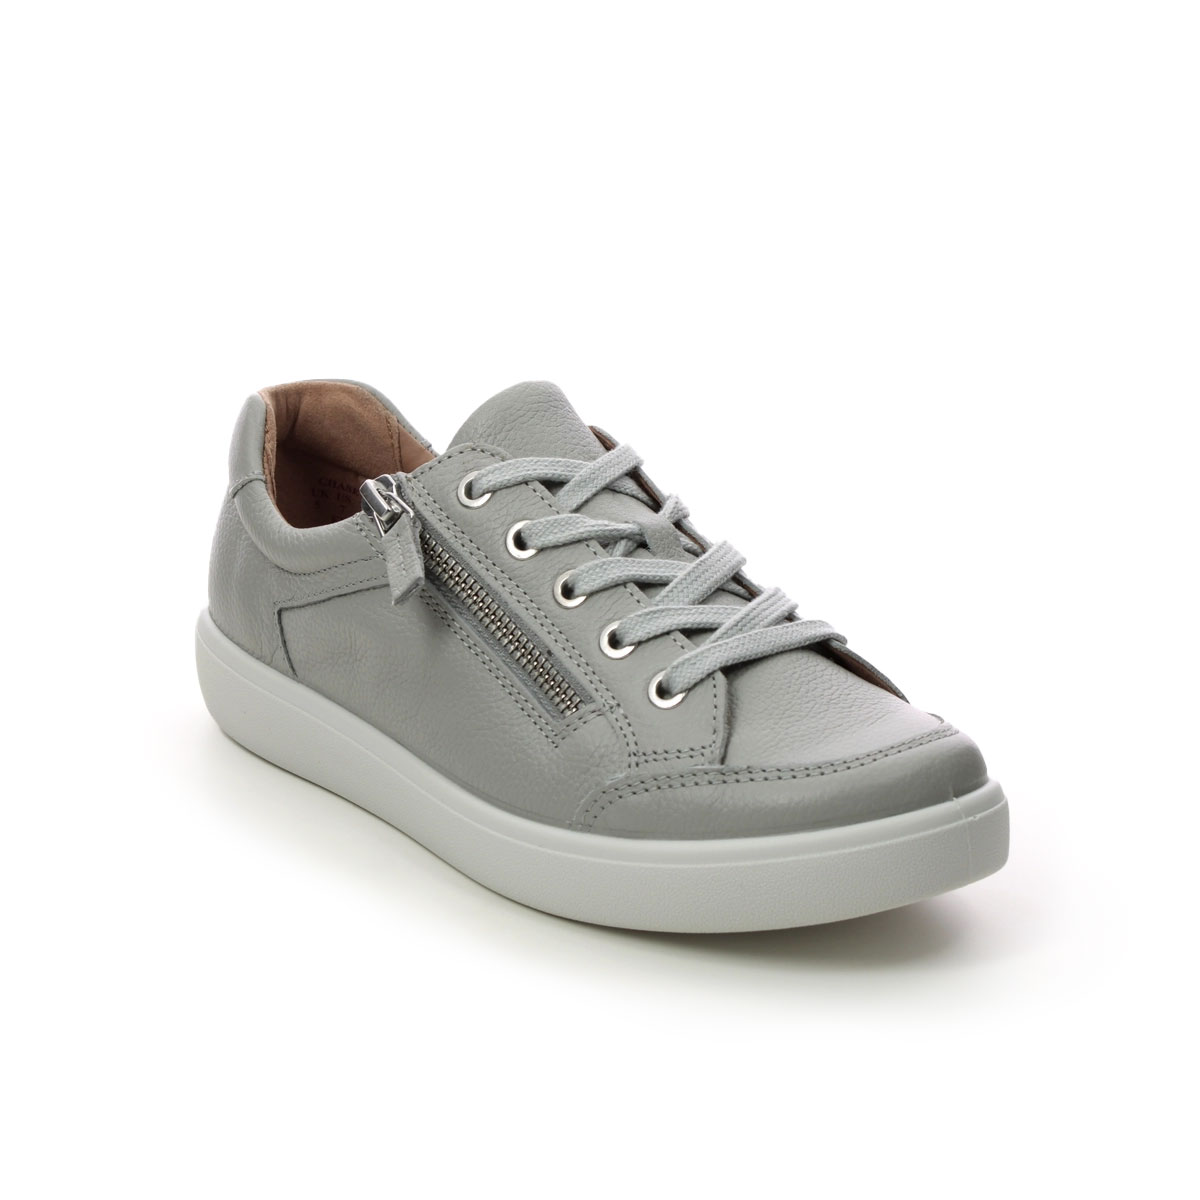 Hotter Chase 2 Wide 16116-03 Light Grey Leather trainers